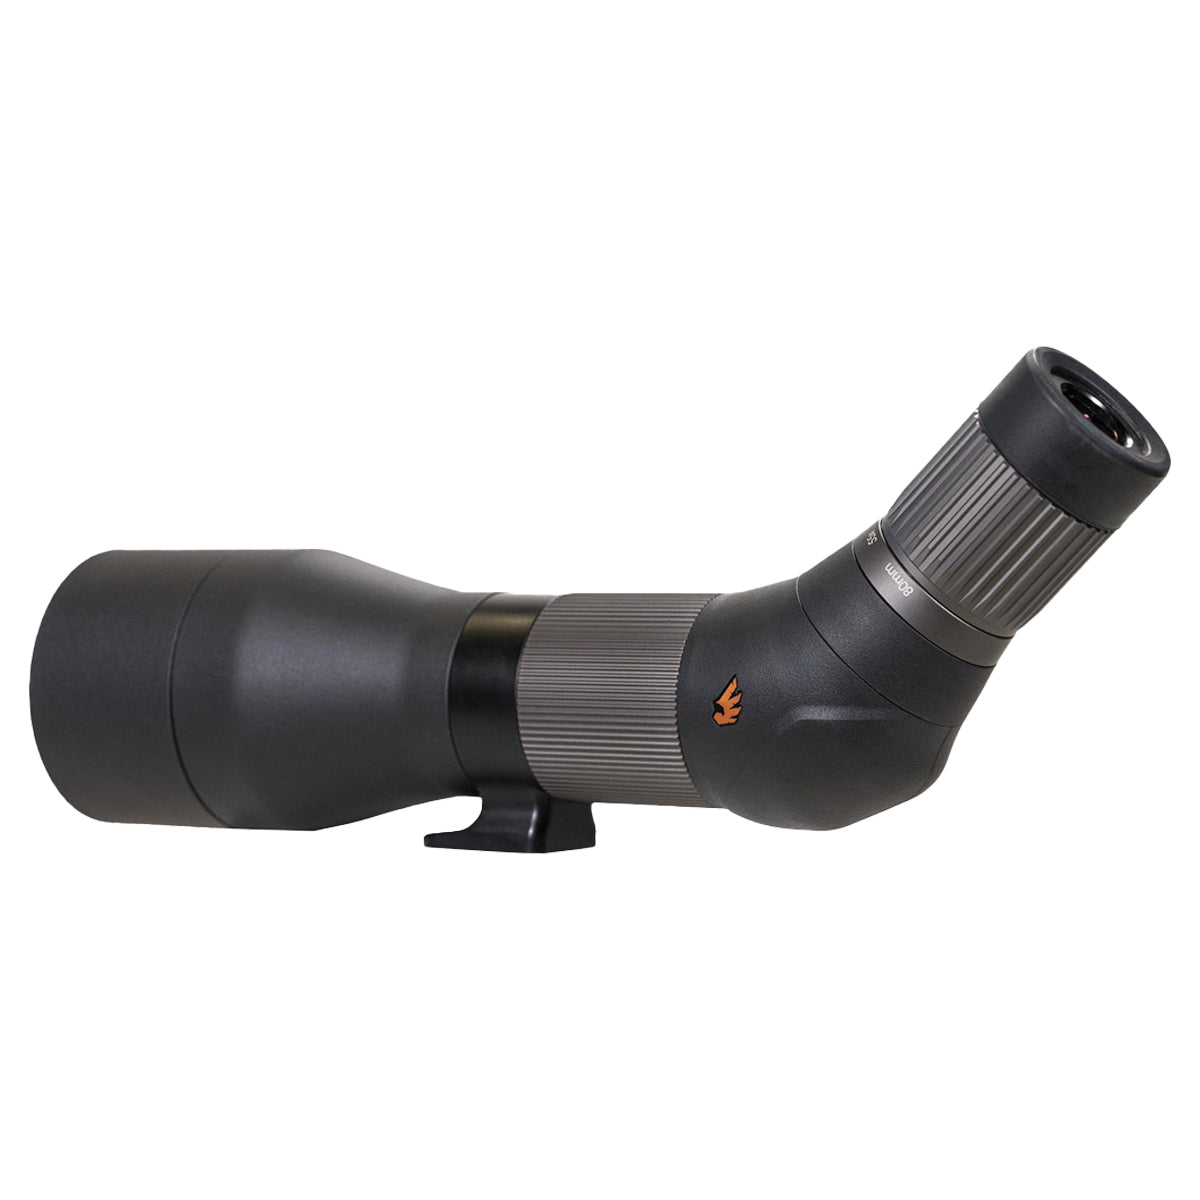 Gunwerks Revic Acura S80a Angled Spotting Scope in  by GOHUNT | Revic - GOHUNT Shop